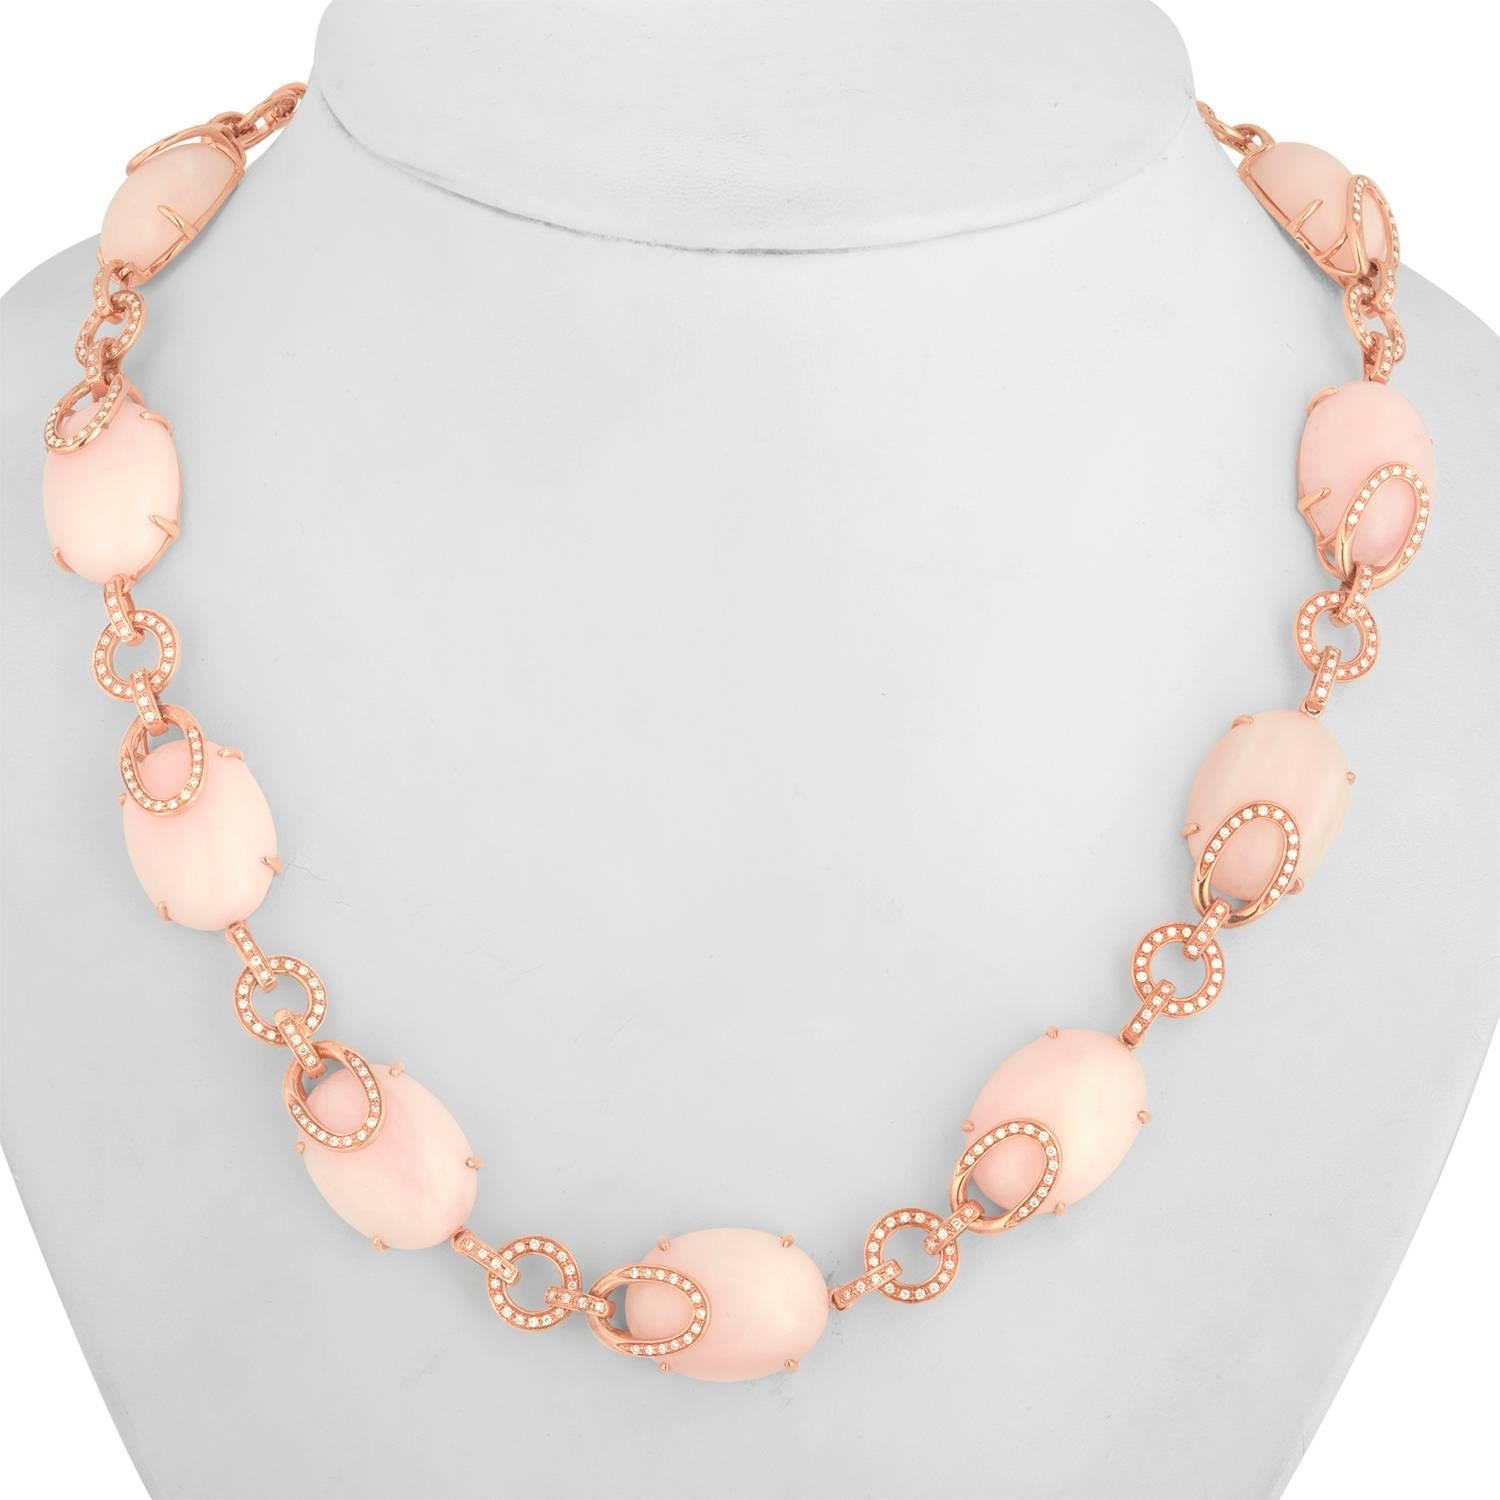 Pink & Peach Opal and Diamond Necklace.
The Necklace is 18K Rose Gold.
The necklace has 1.65ct Diamonds G SI.
There are 168.00 Carats in Peach & Pink Natural
There are 12 Oval Cabochon Pink & Peach Natural Opals.
The necklace weighs 63.9 grams.
The